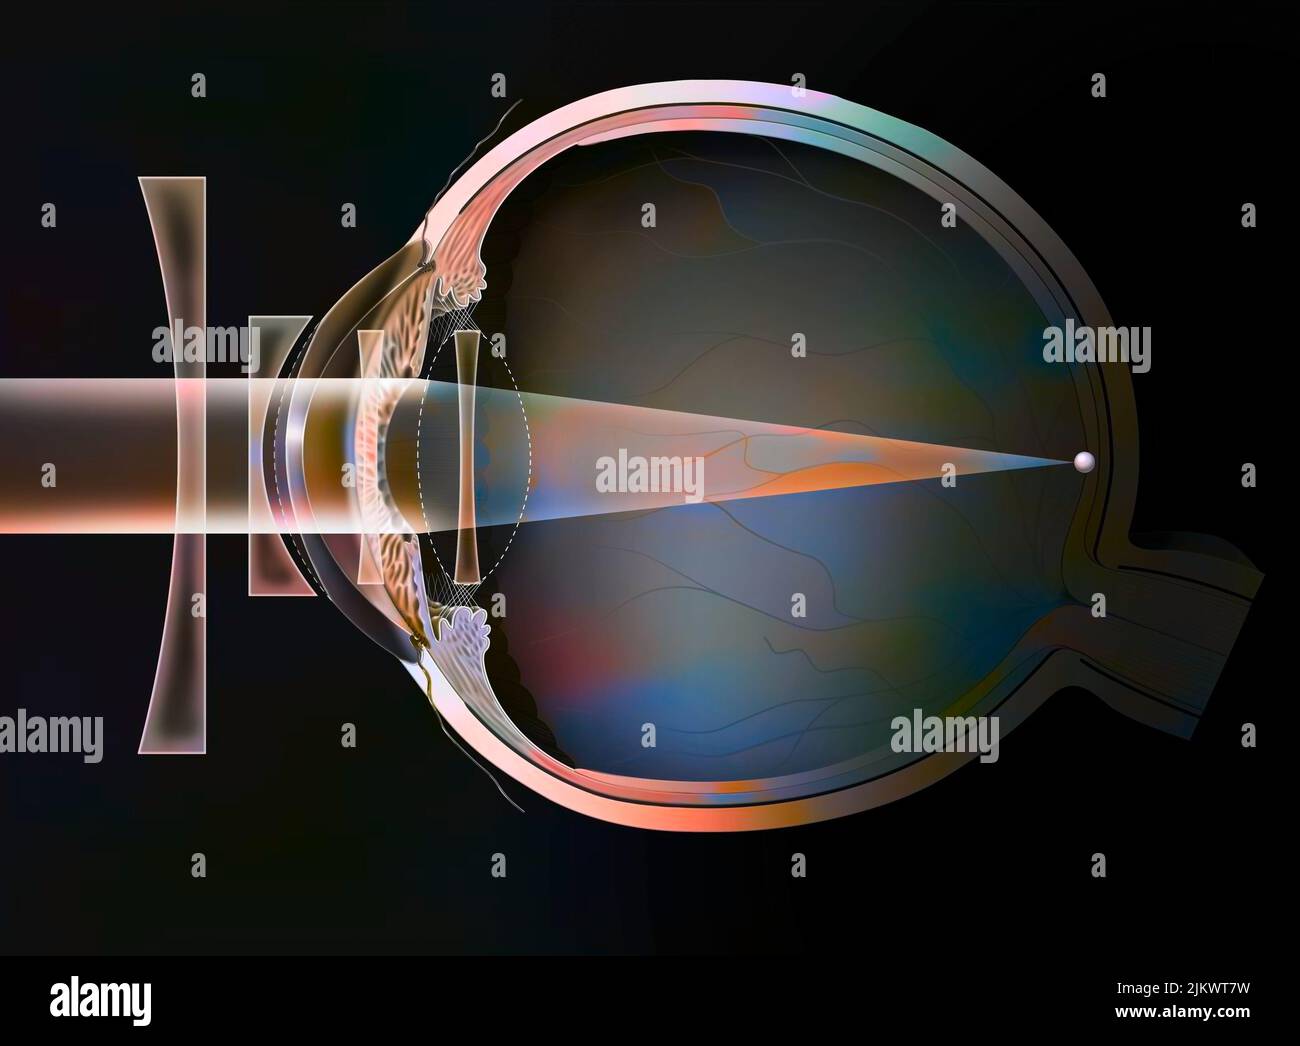 Different possible corrections of a myopic eye: spectacle lenses - external lenses. Stock Photo